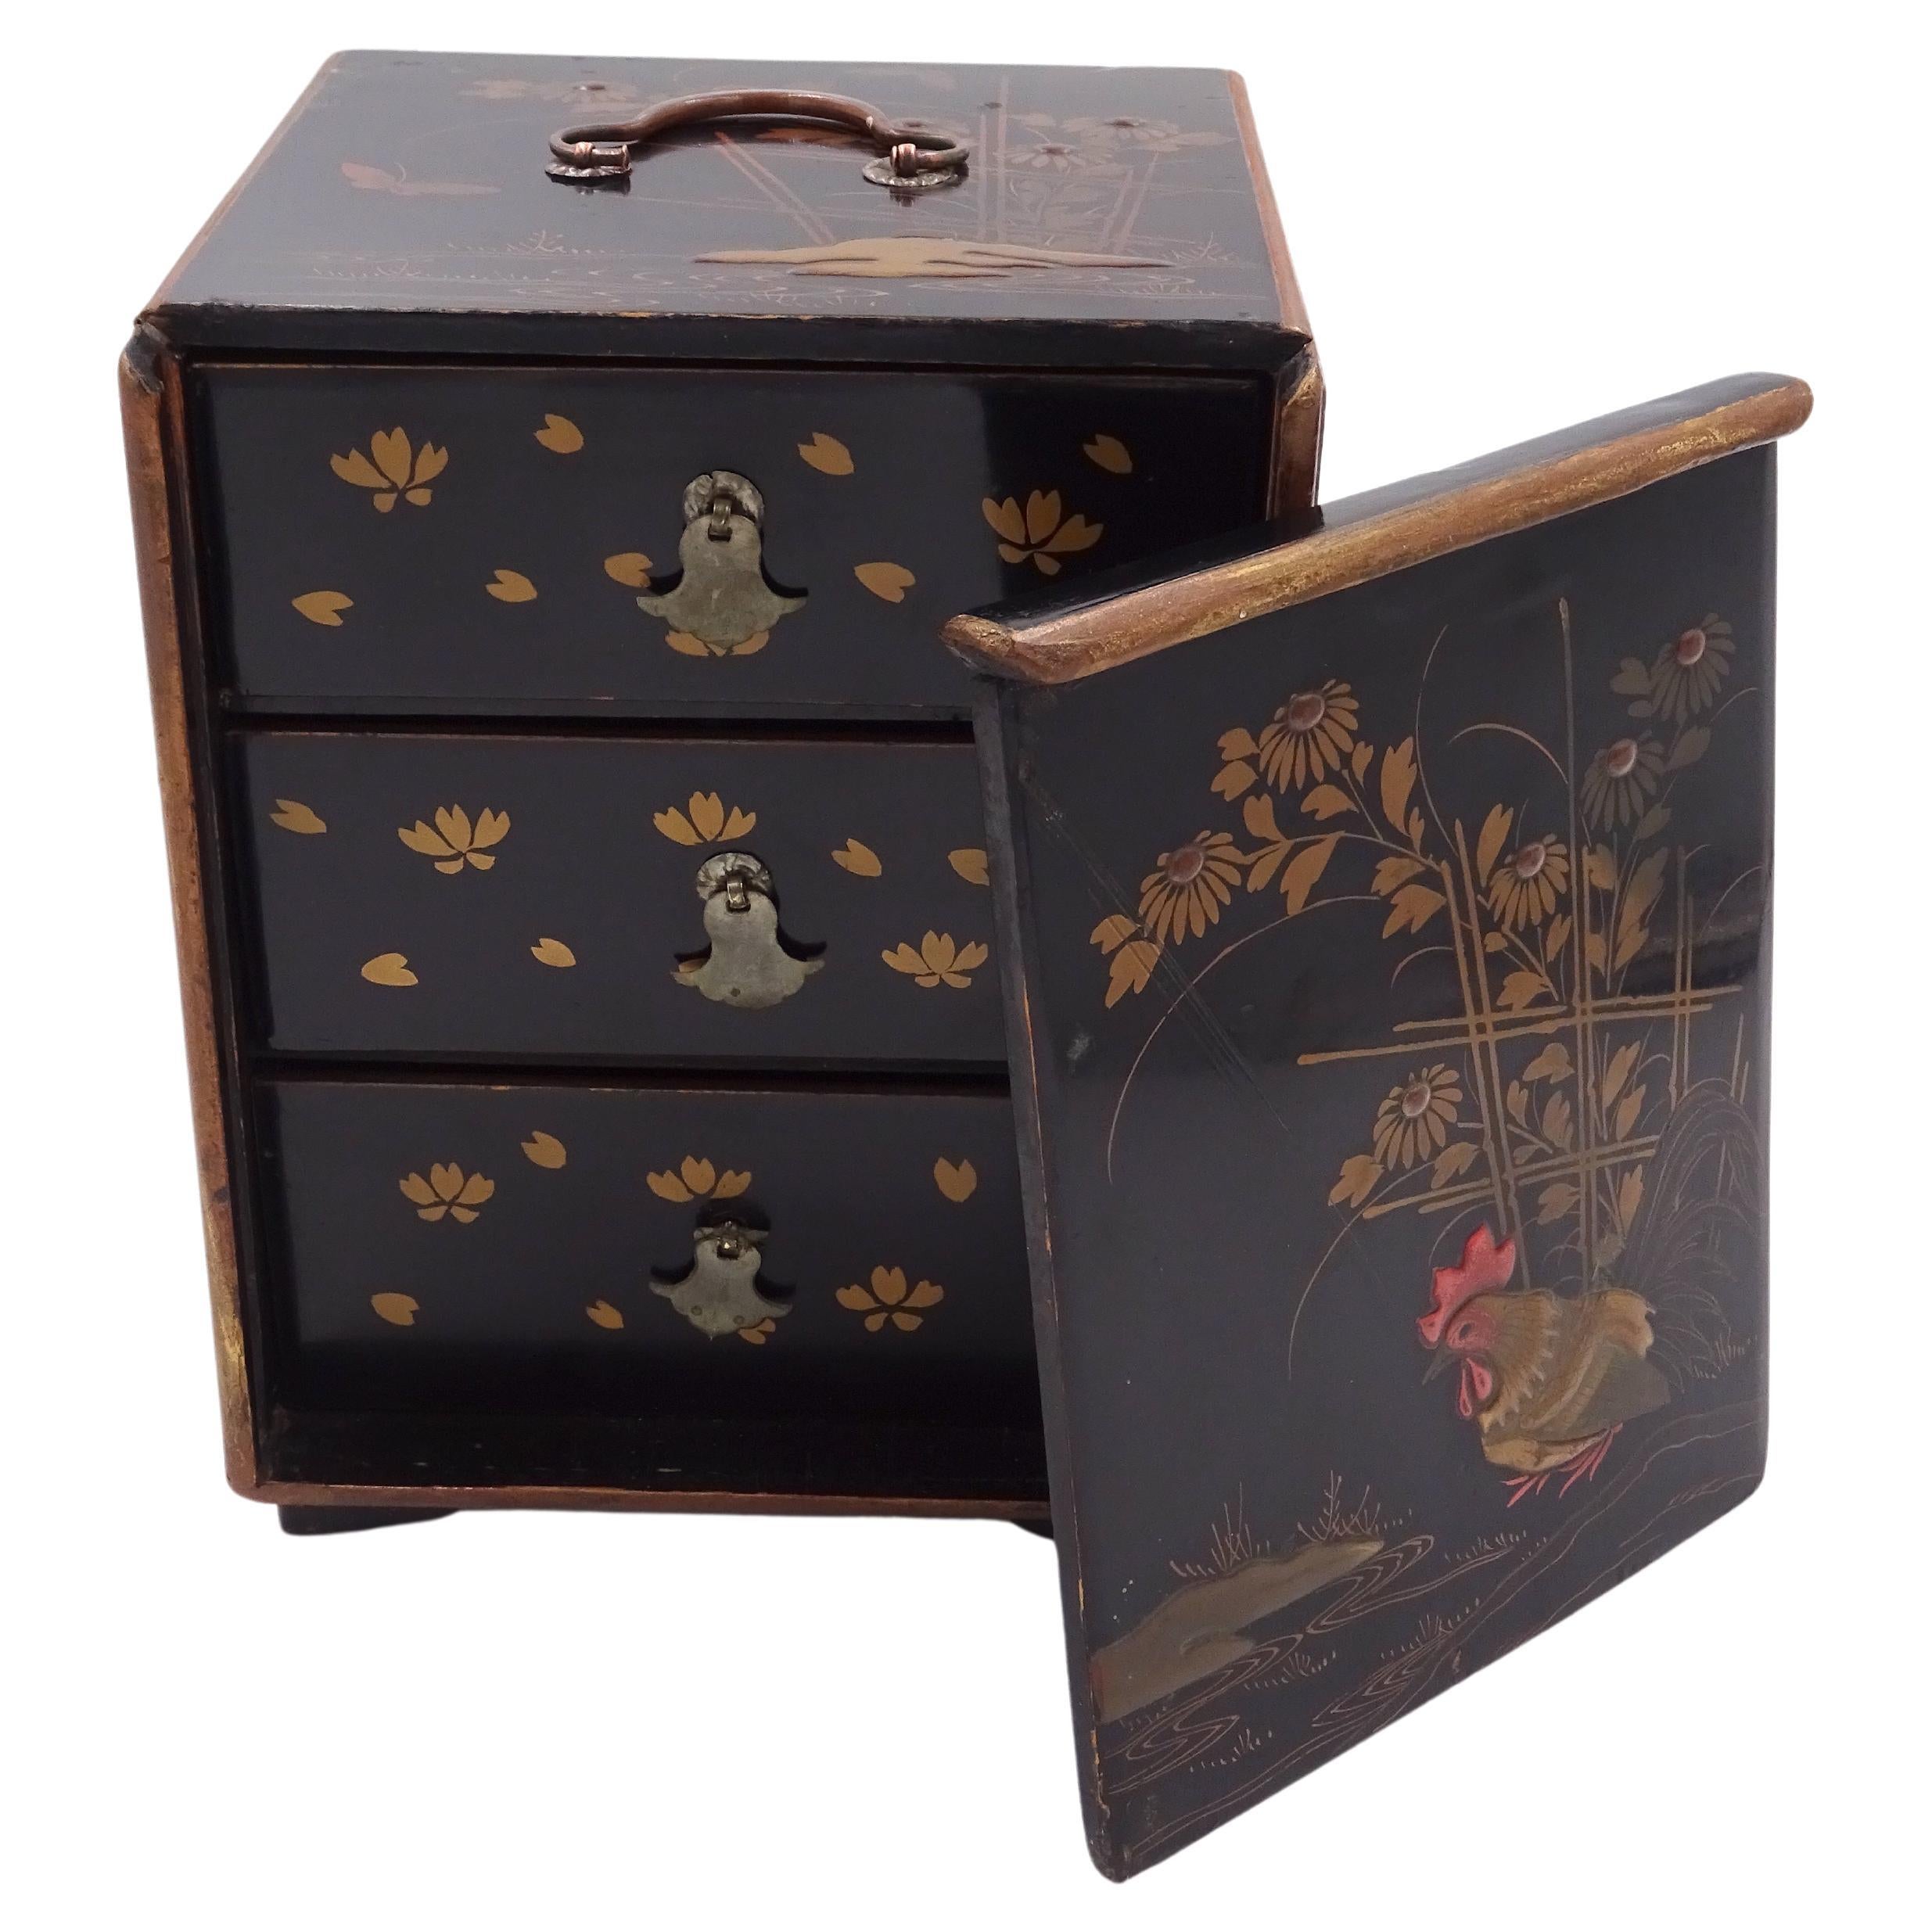 Three-drawer box of Chinese scope, late 19th century with floral decoration For Sale